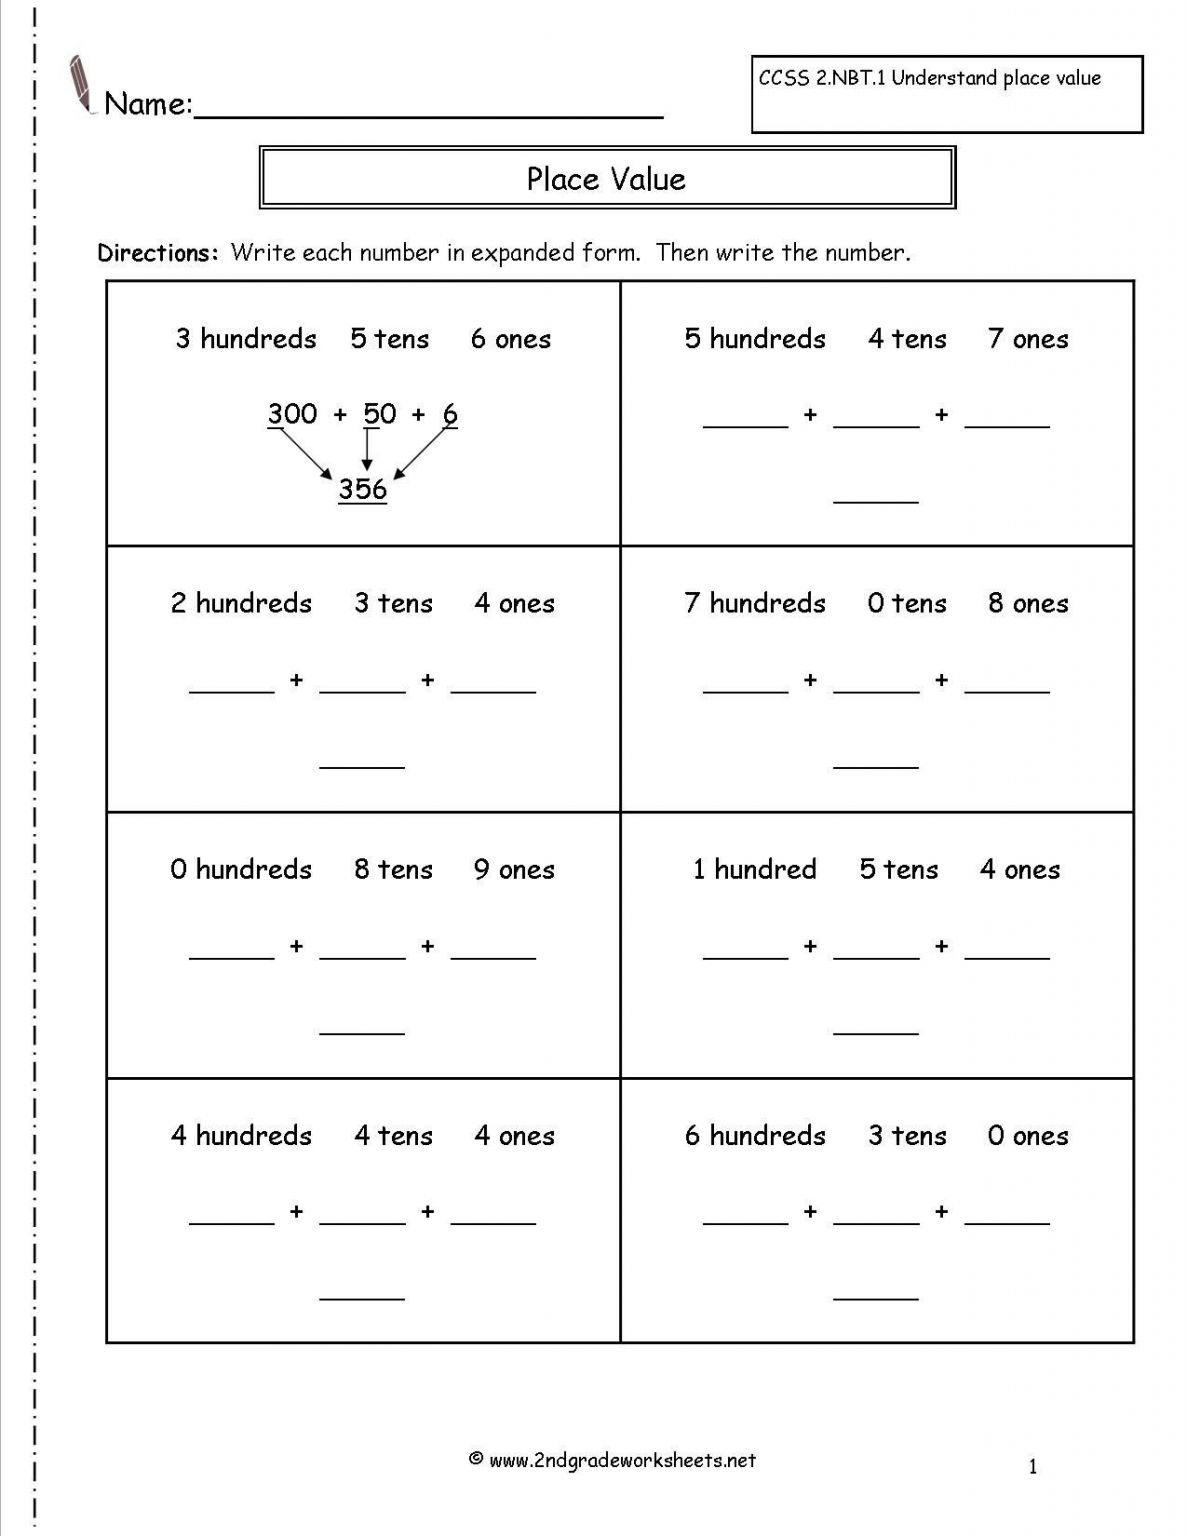 4-free-math-worksheets-first-grade-1-place-value-write-numbers-expanded-form-amp